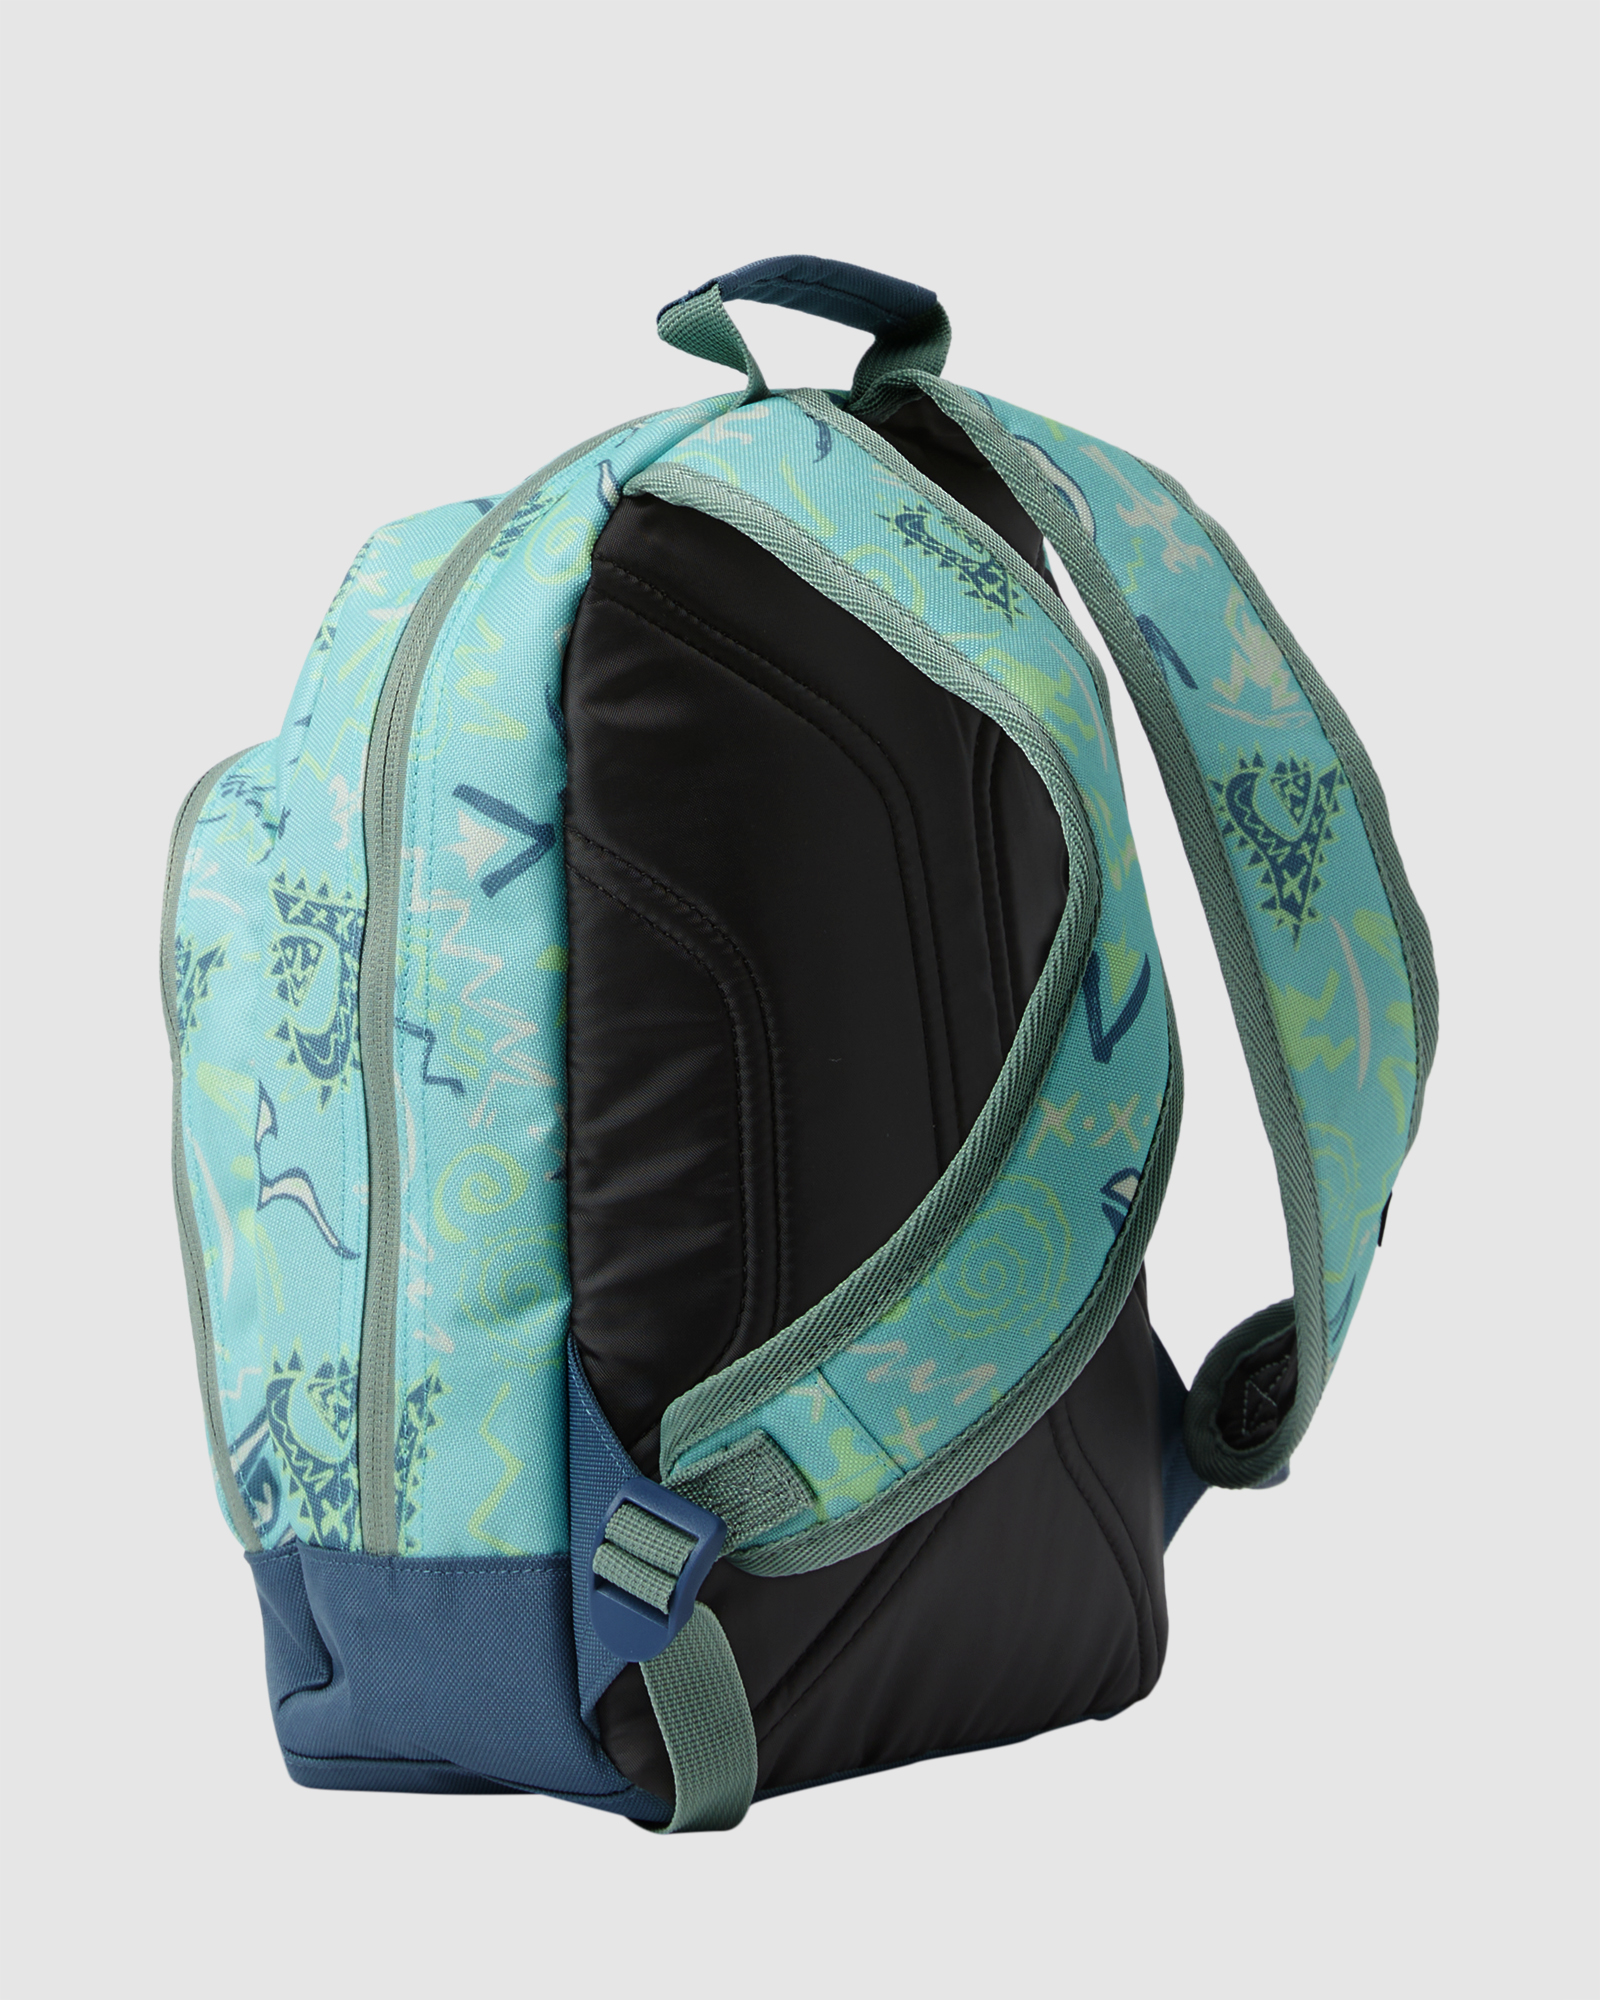 Quiksilver Chomping 12L Small Backpack - Pastel Turquoise | SurfStitch